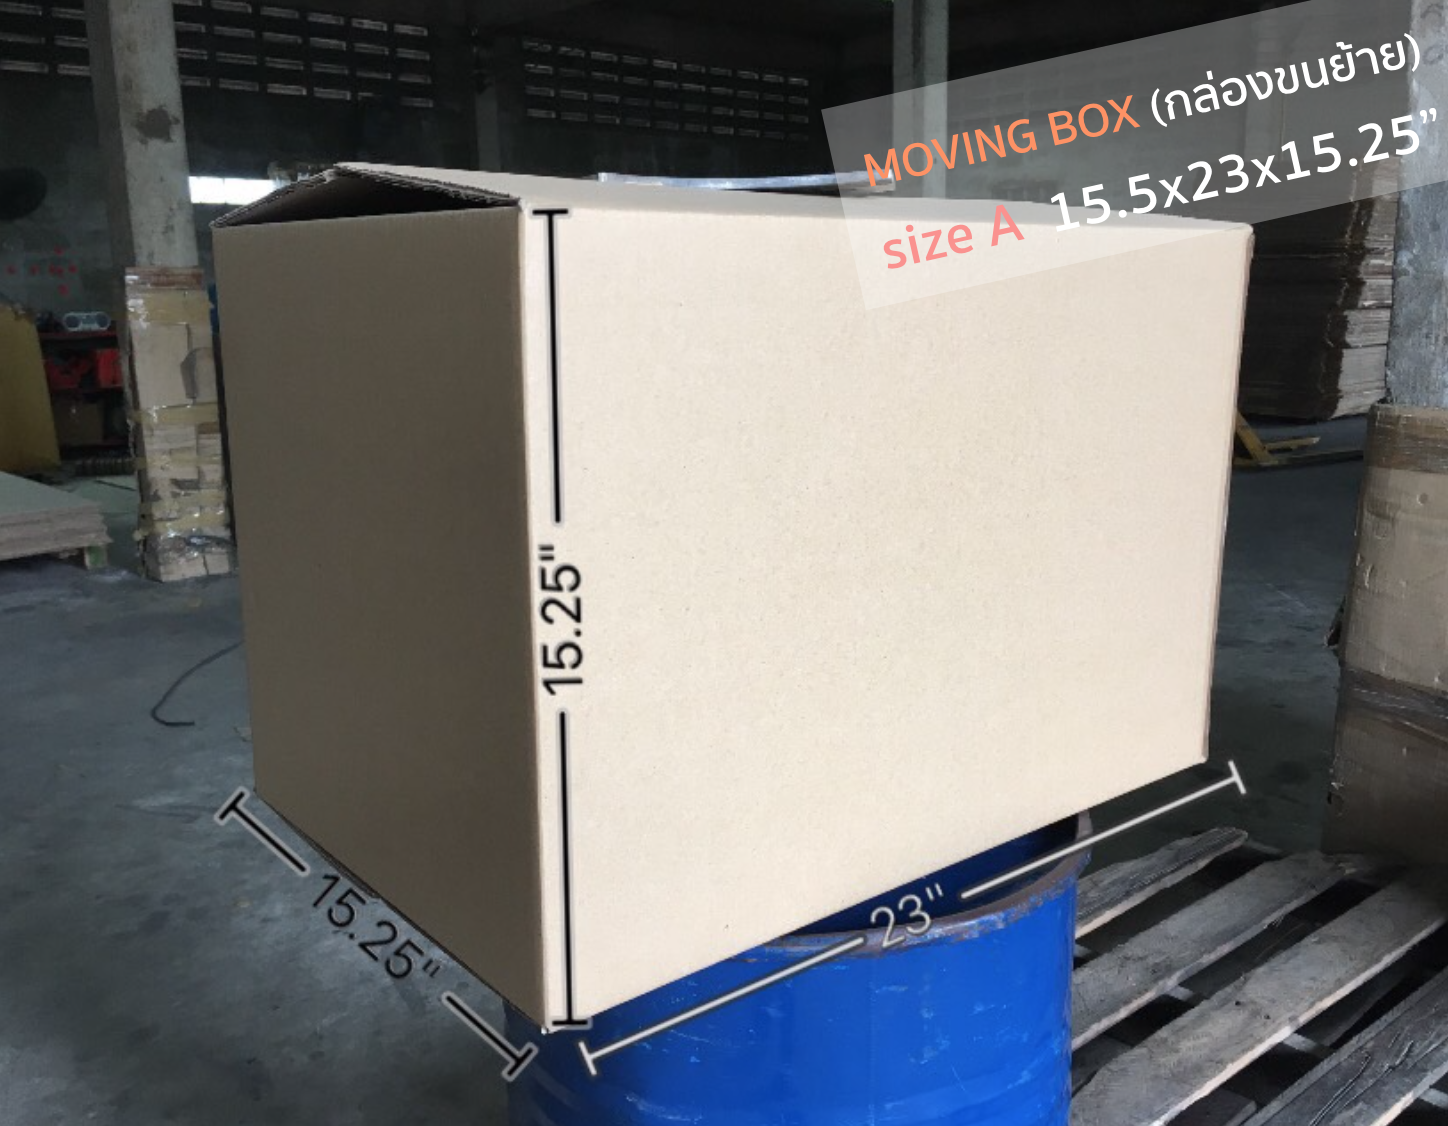 Best carton box for moving ^^  (moving boxes, packing boxes, shipping boxes)